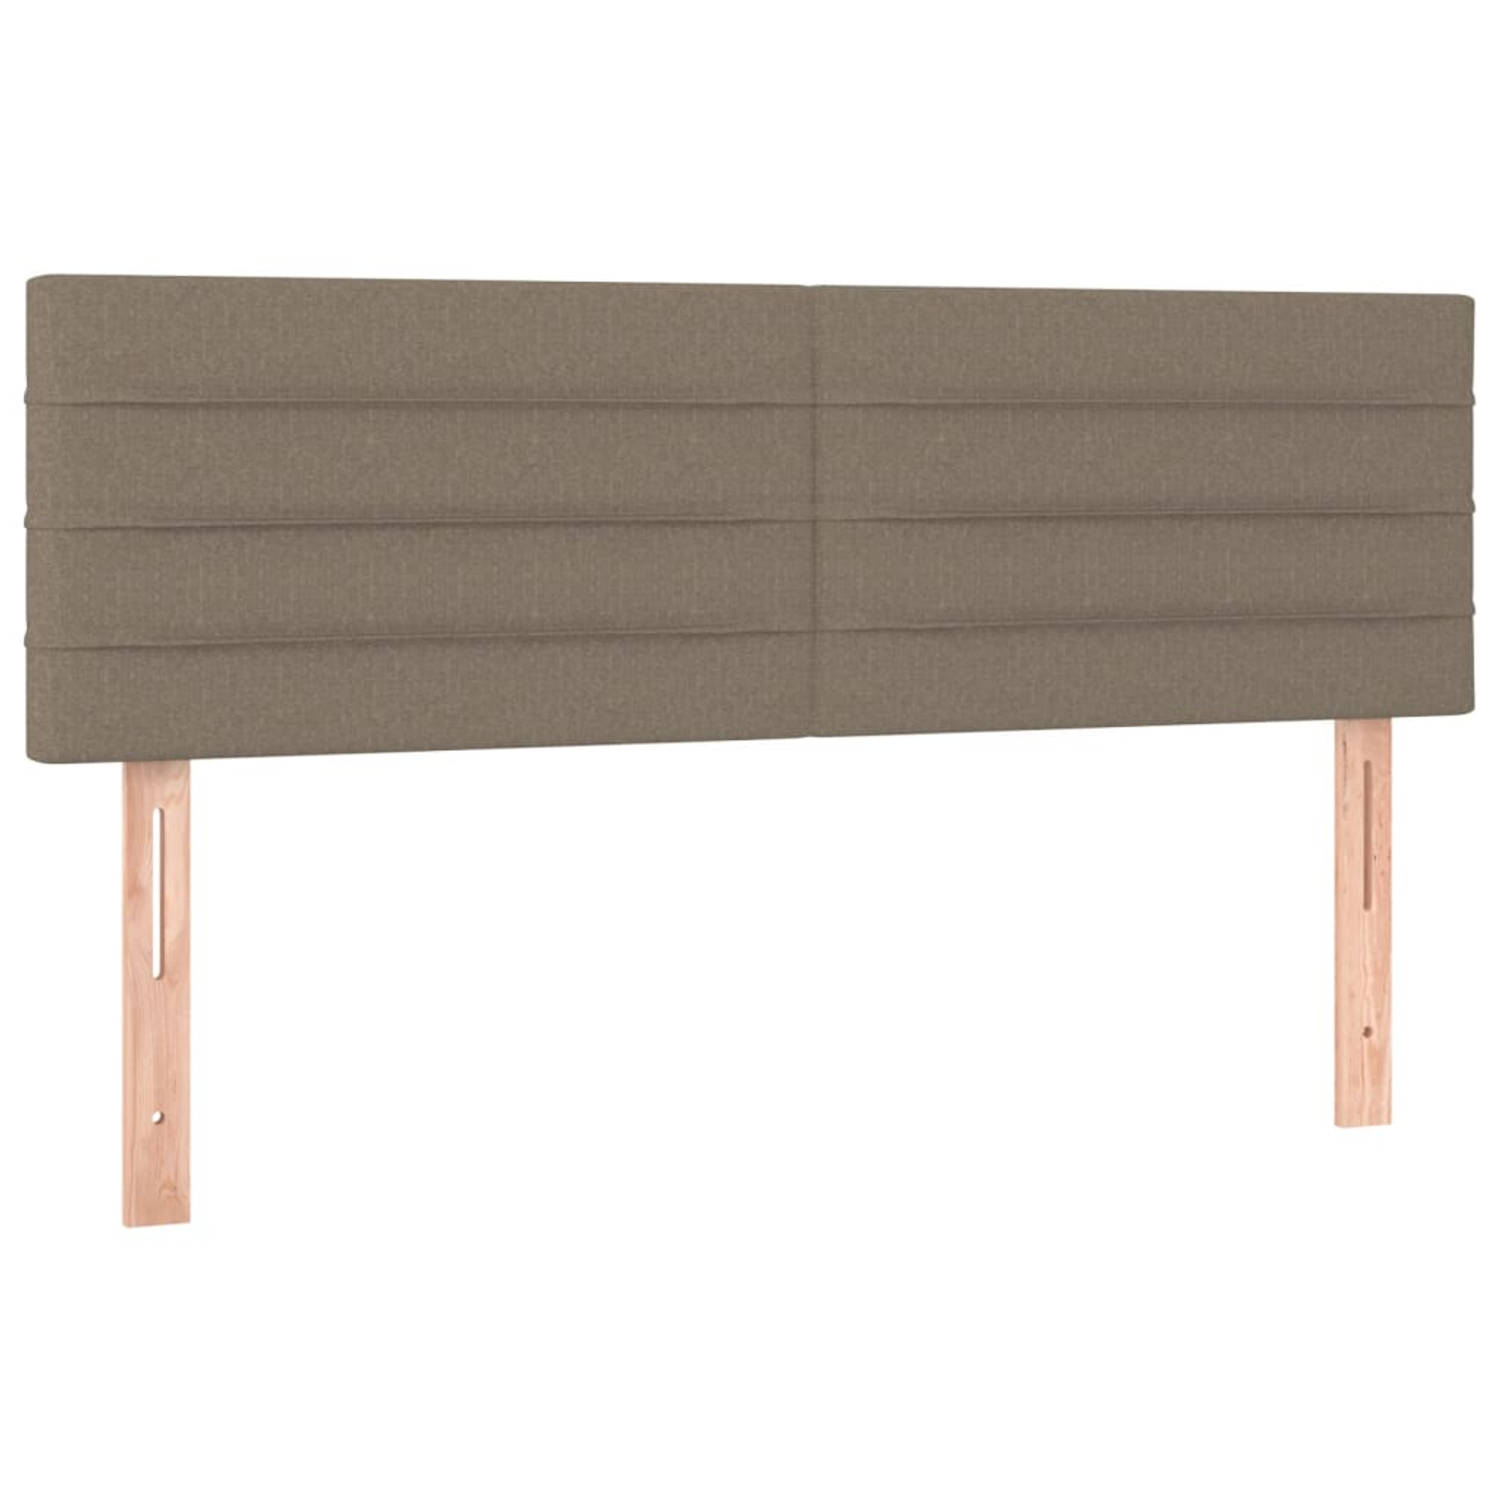 The Living Store Hoofdbord - 144 x 5 x 78/88 cm - Taupe Stof